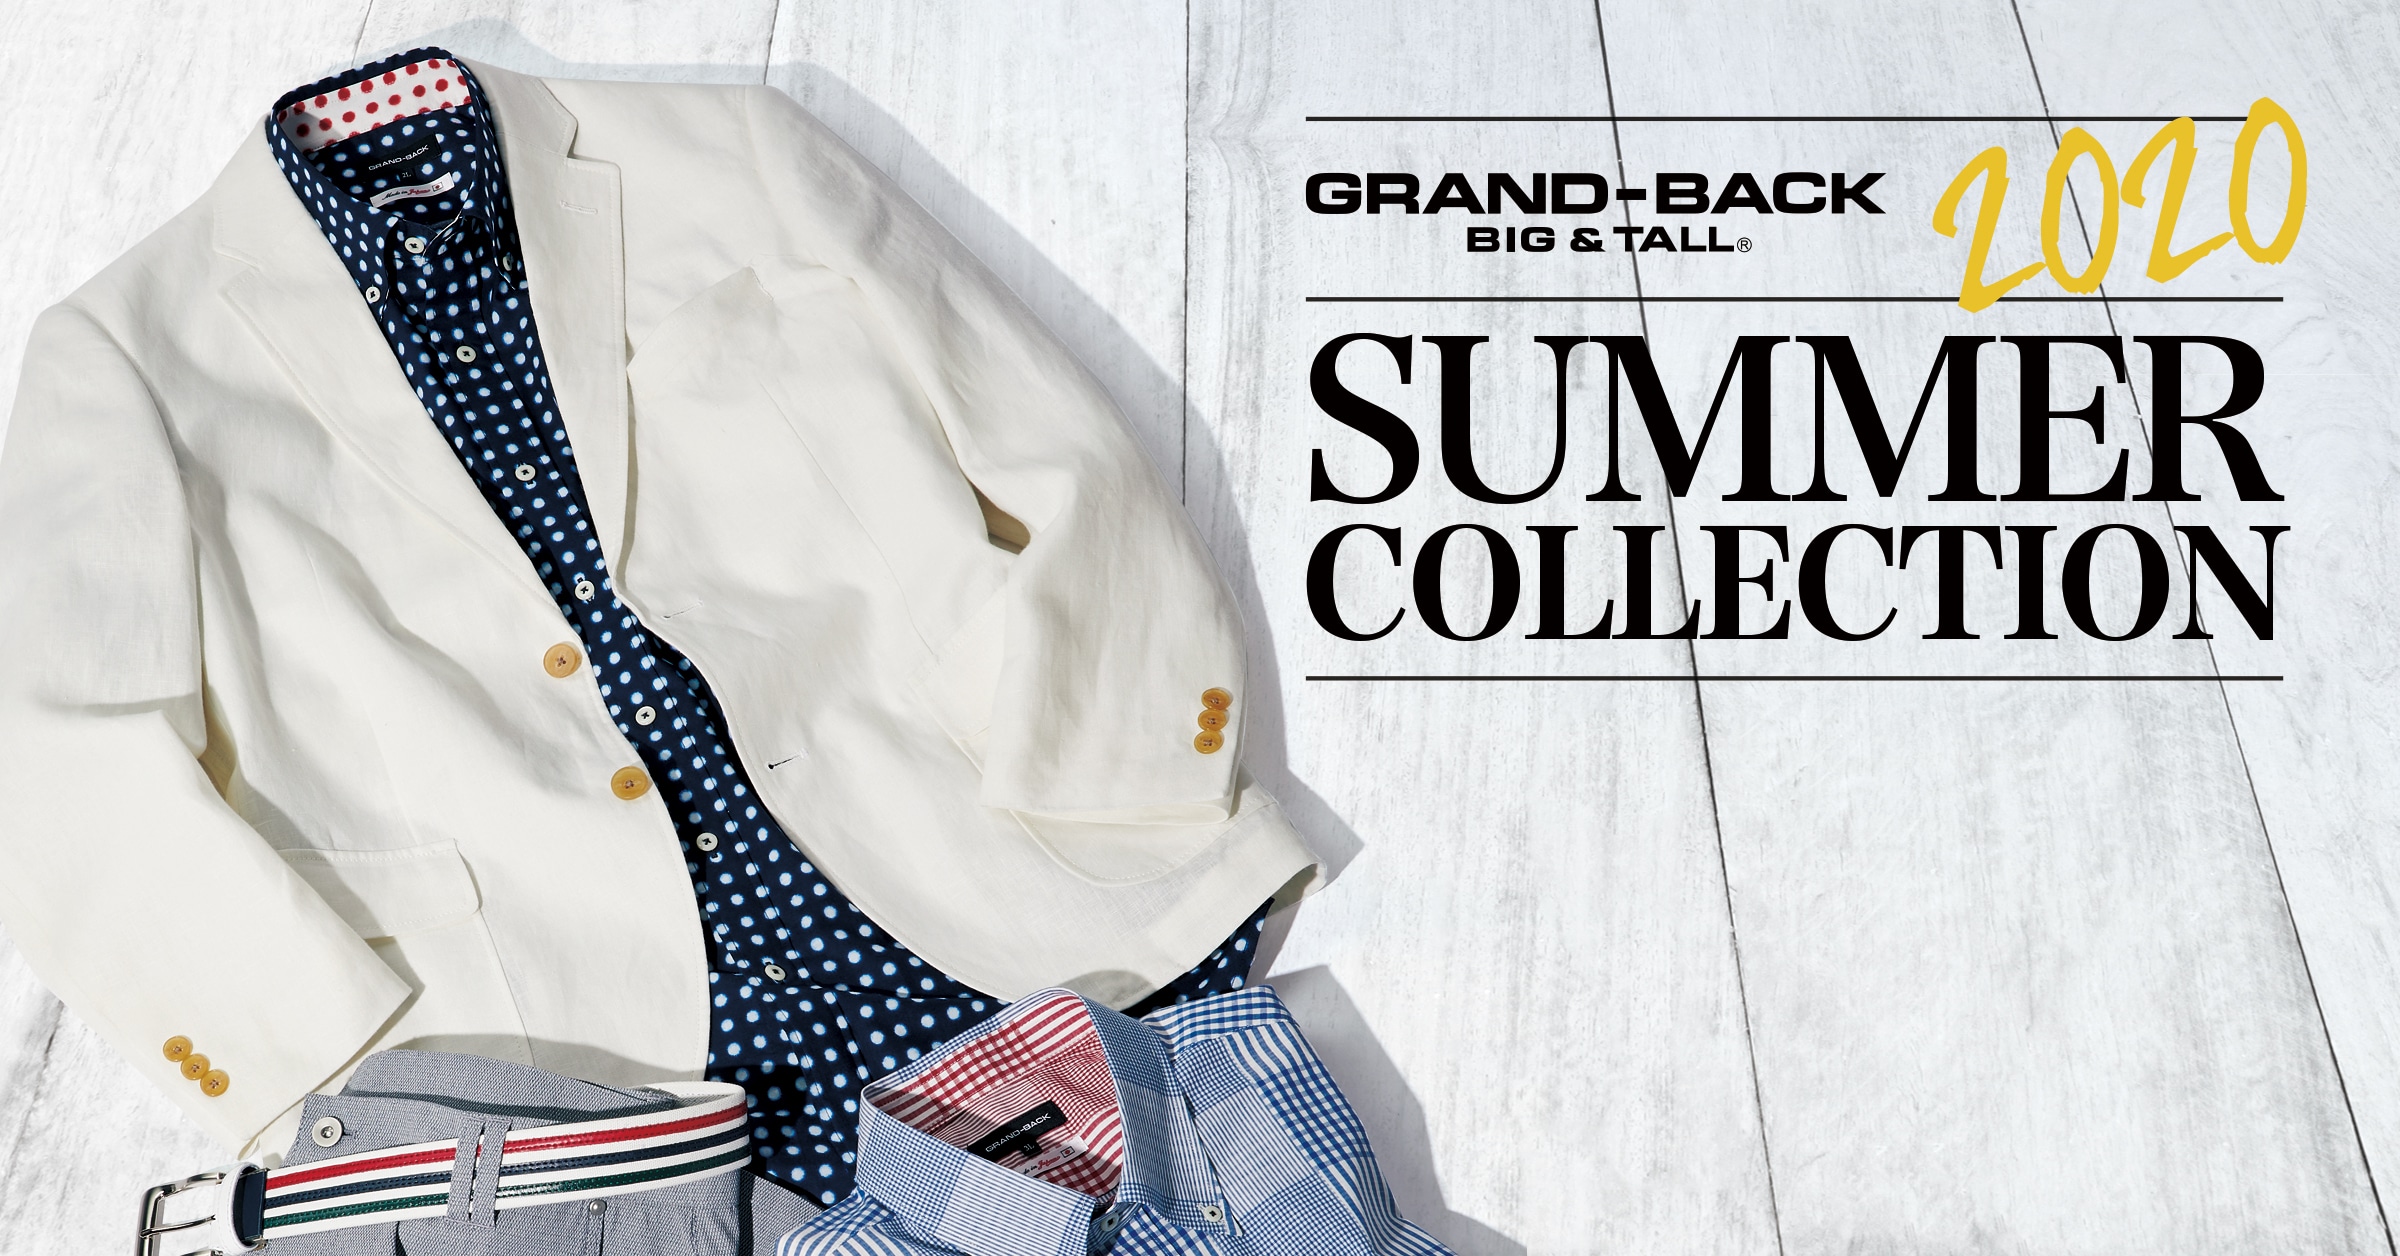 GRAND BACK 2020 SUMMER COLLECTION